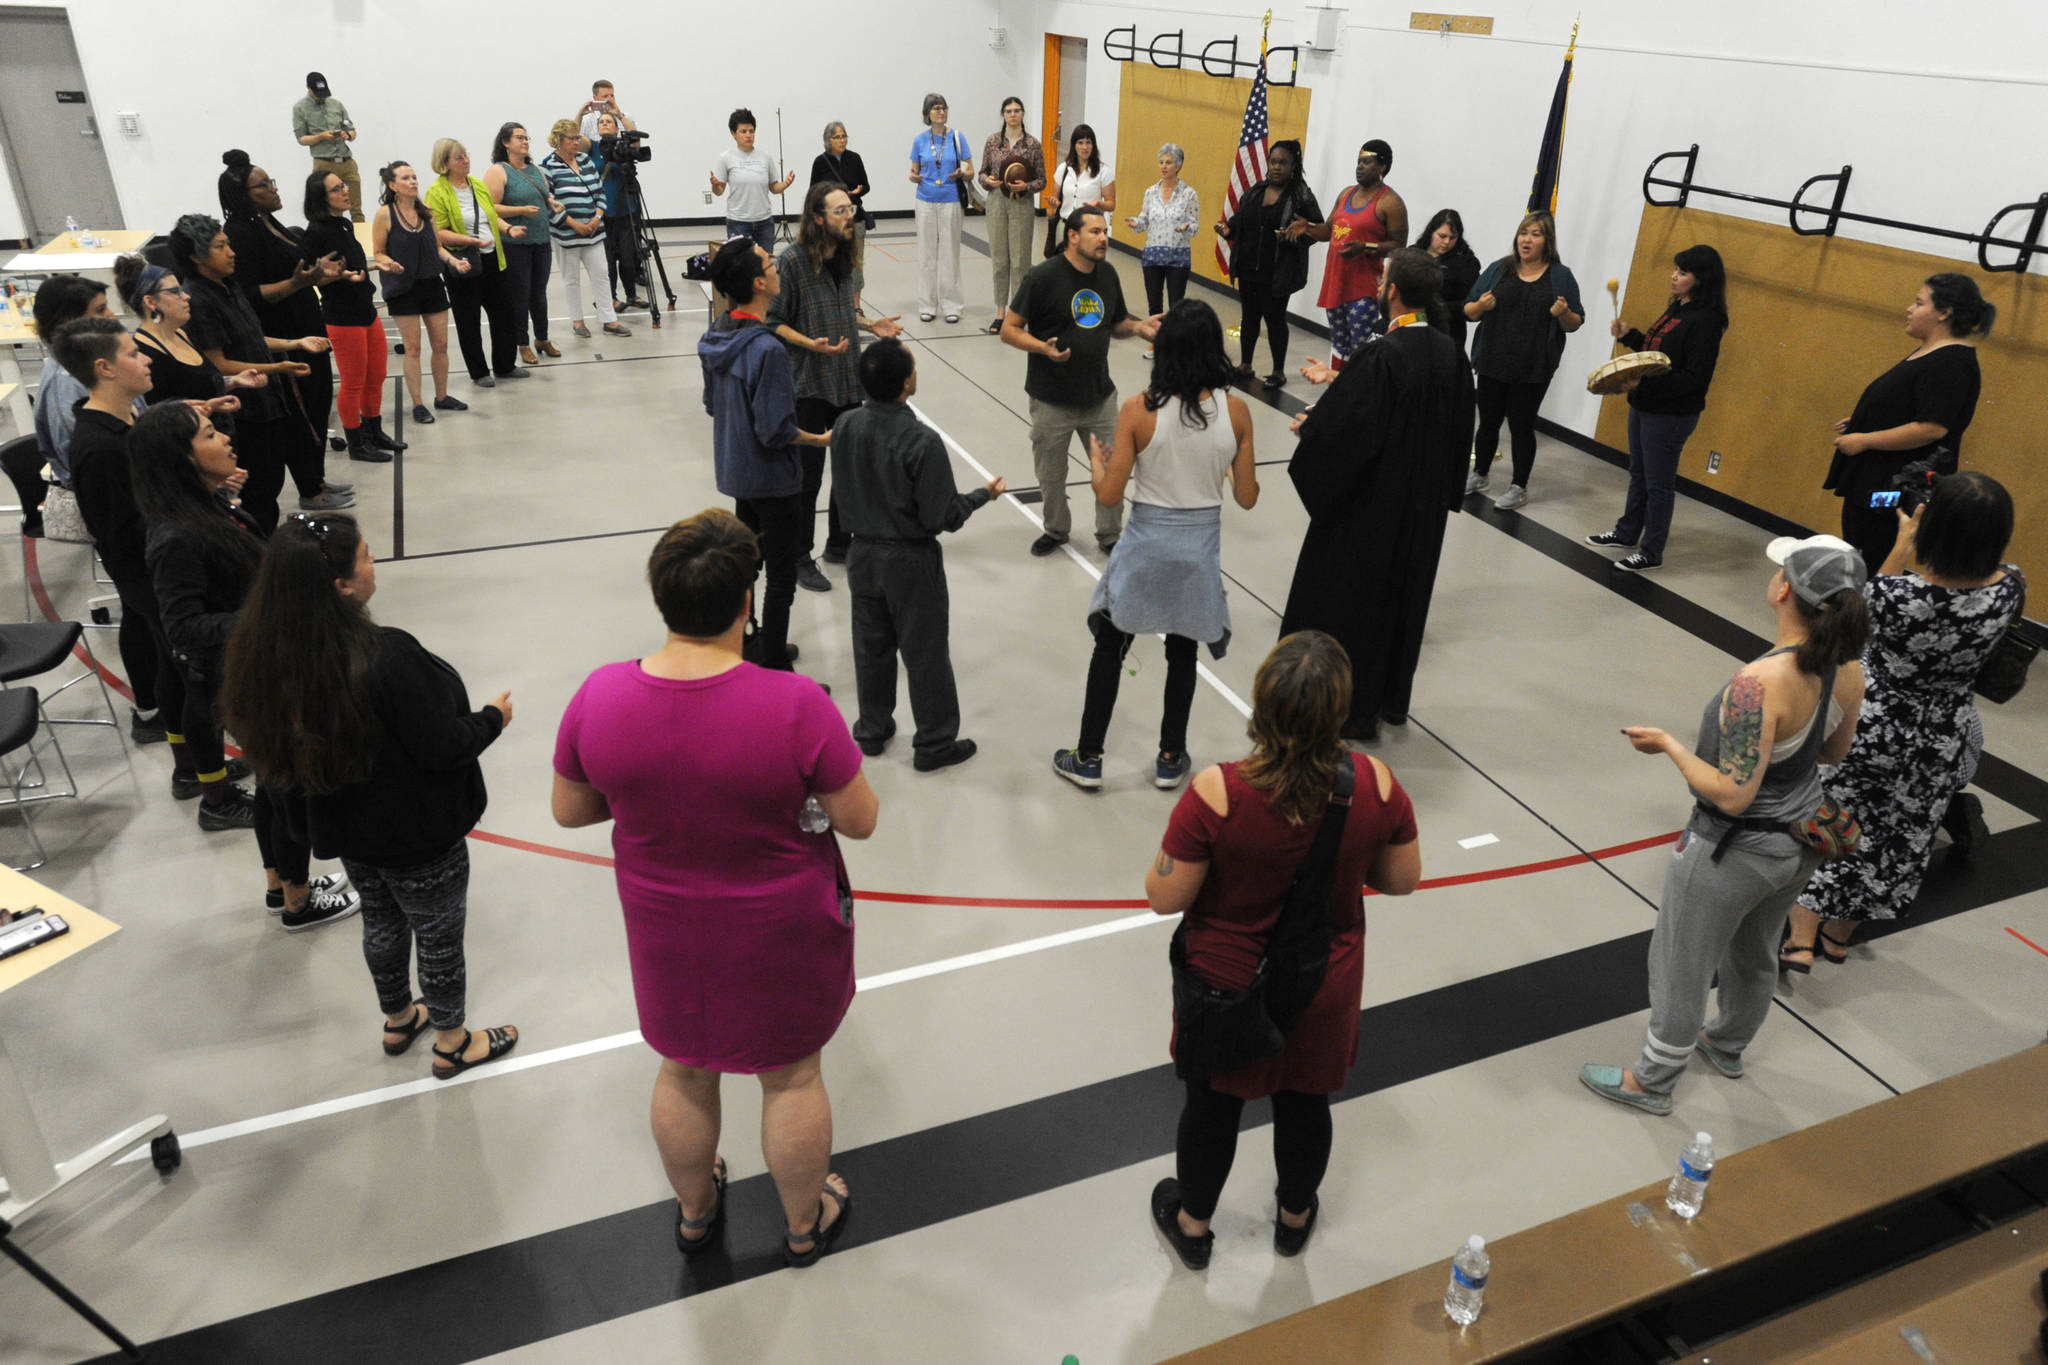 Protesters sang an exit song after hijacking the legislative special session at Wasilla Middle School on Wednesday, July 10, 2019. (Bill Roth / ADN)